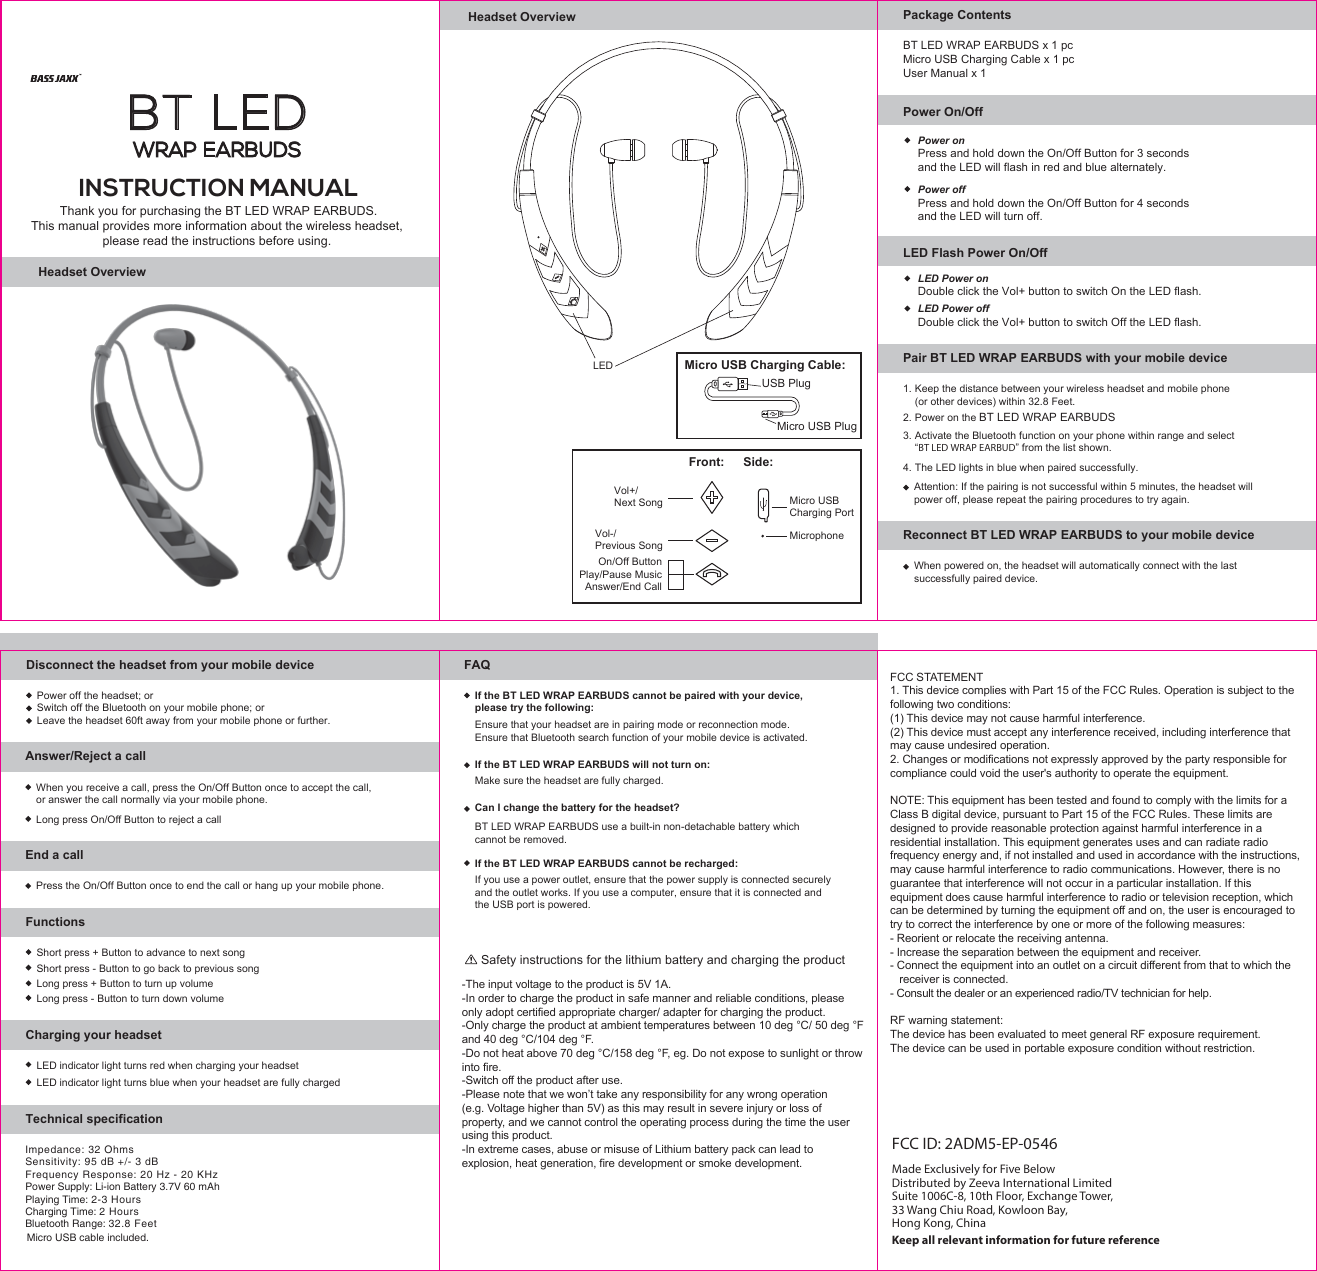 Headset Overview3. Activate the Bluetooth function on your phone within range and select   “BT LED WRAP EARBUD” from the list shown.4. The LED lights in blue when paired successfully.Attention: If the pairing is not successful within 5 minutes, the headset will power off, please repeat the pairing procedures to try again. Pair BT LED WRAP EARBUDS with your mobile device1. Keep the distance between your wireless headset and mobile phone   (or other devices) within 32.8 Feet.2. Power on the BT LED WRAP EARBUDSReconnect BT LED WRAP EARBUDS to your mobile deviceWhen powered on, the headset will automatically connect with the last successfully paired device.Disconnect the headset from your mobile deviceLeave the headset 60ft away from your mobile phone or further.Power off the headset; orSwitch off the Bluetooth on your mobile phone; orAnswer/Reject a callEnd a callWhen you receive a call, press the On/Off Button once to accept the call,or answer the call normally via your mobile phone.Long press On/Off Button to reject a callPress the On/Off Button once to end the call or hang up your mobile phone.Technical specificationFAQFCC ID: 2ADM5-EP-0546Made Exclusively for Five BelowDistributed by Zeeva International LimitedSuite 1006C-8, 10th Floor, Exchange Tower, 33 Wang Chiu Road, Kowloon Bay,Hong Kong, ChinaKeep all relevant information for future referenceFCC STATEMENT1. This device complies with Part 15 of the FCC Rules. Operation is subject to the following two conditions:(1) This device may not cause harmful interference.(2) This device must accept any interference received, including interference that may cause undesired operation.2. Changes or modifications not expressly approved by the party responsible for compliance could void the user&apos;s authority to operate the equipment.NOTE: This equipment has been tested and found to comply with the limits for a Class B digital device, pursuant to Part 15 of the FCC Rules. These limits are designed to provide reasonable protection against harmful interference in a residential installation. This equipment generates uses and can radiate radio frequency energy and, if not installed and used in accordance with the instructions, may cause harmful interference to radio communications. However, there is no guarantee that interference will not occur in a particular installation. If this equipment does cause harmful interference to radio or television reception, which can be determined by turning the equipment off and on, the user is encouraged to try to correct the interference by one or more of the following measures:- Reorient or relocate the receiving antenna.- Increase the separation between the equipment and receiver.- Connect the equipment into an outlet on a circuit different from that to which the    receiver is connected.- Consult the dealer or an experienced radio/TV technician for help.RF warning statement:The device has been evaluated to meet general RF exposure requirement. The device can be used in portable exposure condition without restriction.LED indicator light turns red when charging your headsetLED indicator light turns blue when your headset are fully chargedShort press + Button to advance to next songLong press + Button to turn up volumeLong press - Button to turn down volumeShort press - Button to go back to previous songFunctionsCharging your headsetHeadset OverviewPower On/OffLED Micro USB Charging Cable:USB PlugMicro USB PlugPower onPress and hold down the On/Off Button for 3 seconds and the LED will flash in red and blue alternately.Power offPress and hold down the On/Off Button for 4 seconds and the LED will turn off.LED Flash Power On/OffLED Power on Double click the Vol+ button to switch On the LED flash.LED Power offDouble click the Vol+ button to switch Off the LED flash.If the BT LED WRAP EARBUDS cannot be paired with your device, please try the following:Ensure that your headset are in pairing mode or reconnection mode.Ensure that Bluetooth search function of your mobile device is activated.If the BT LED WRAP EARBUDS will not turn on:Make sure the headset are fully charged.Can I change the battery for the headset?BT LED WRAP EARBUDS use a built-in non-detachable battery whichcannot be removed.If the BT LED WRAP EARBUDS cannot be recharged:If you use a power outlet, ensure that the power supply is connected securely and the outlet works. If you use a computer, ensure that it is connected and the USB port is powered.-The input voltage to the product is 5V 1A.-In order to charge the product in safe manner and reliable conditions, please only adopt certified appropriate charger/ adapter for charging the product.-Only charge the product at ambient temperatures between 10 deg °C/ 50 deg °F and 40 deg °C/104 deg °F.-Do not heat above 70 deg °C/158 deg °F, eg. Do not expose to sunlight or throw into fire.-Switch off the product after use.-Please note that we won’t take any responsibility for any wrong operation (e.g. Voltage higher than 5V) as this may result in severe injury or loss of property, and we cannot control the operating process during the time the user using this product.-In extreme cases, abuse or misuse of Lithium battery pack can lead to explosion, heat generation, fire development or smoke development.Safety instructions for the lithium battery and charging the productThank you for purchasing the BT LED WRAP EARBUDS.This manual provides more information about the wireless headset, please read the instructions before using. INSTRUCTION MANUALVol-/Previous SongOn/Off ButtonPlay/Pause MusicAnswer/End CallVol+/Next SongFront: Side:MicrophoneMicro USB Charging PortPackage ContentsBT LED WRAP EARBUDS x 1 pcMicro USB Charging Cable x 1 pcUser Manual x 1BT LED  WRAP EARBUDSImpedance: 32 Ohms Sensitivity: 95 dB +/- 3 dBFrequency Response: 20 Hz - 20 KHzPower Supply: Li-ion Battery 3.7V 60 mAh  Playing Time: 2-3 HoursCharging Time: 2 HoursBluetooth Range: 32.8 FeetMicro USB cable included.